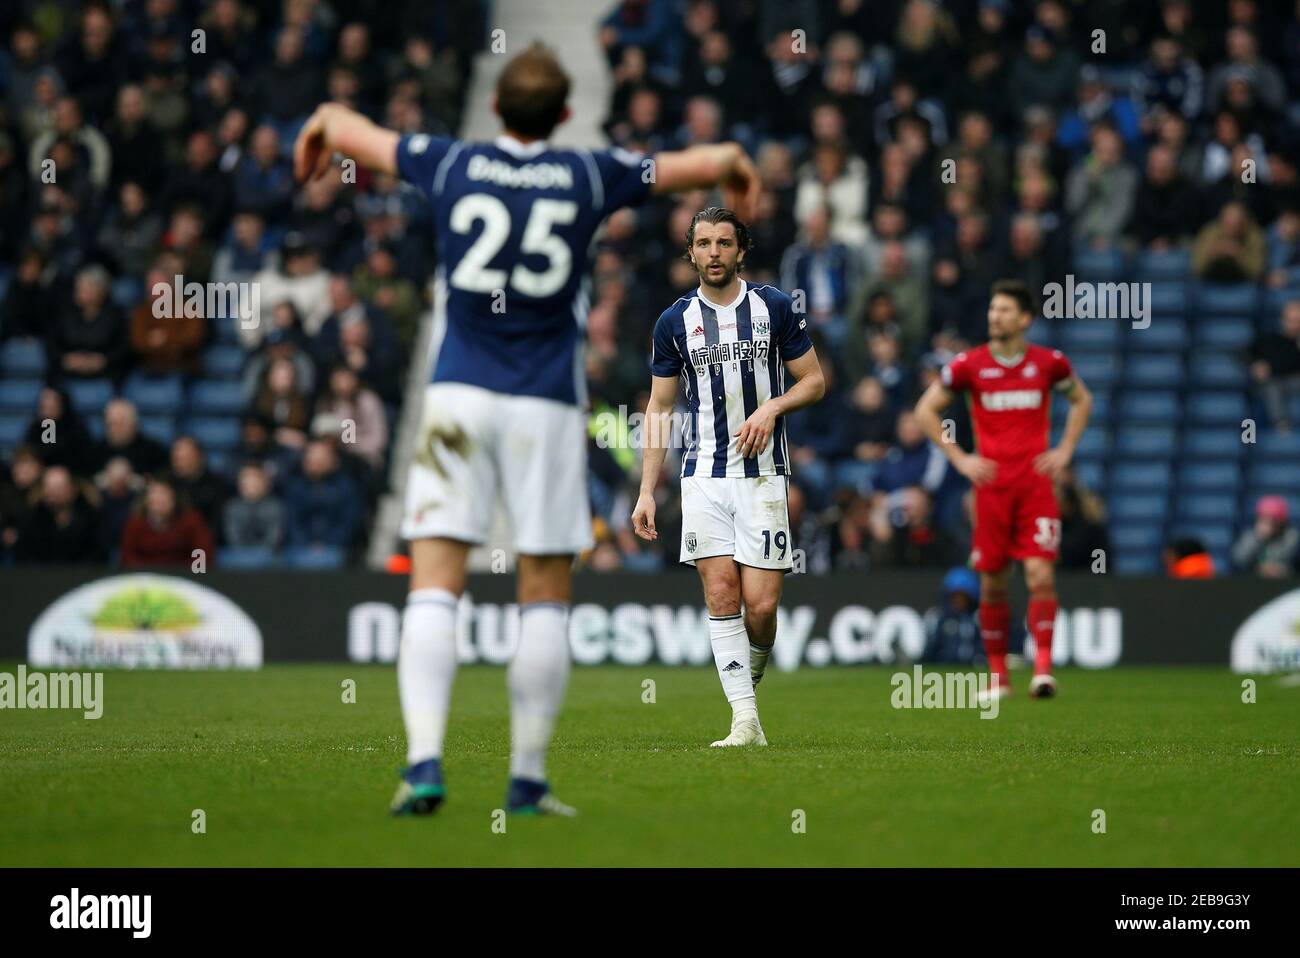 Soccer Football - Premier League - West Bromwich Albion vs Swansea City - The Hawthorns, West Bromwich, Britain - April 7, 2018   West Bromwich Albion's Jay Rodriguez and Craig Dawson               REUTERS/Andrew Yates    EDITORIAL USE ONLY. No use with unauthorized audio, video, data, fixture lists, club/league logos or 'live' services. Online in-match use limited to 75 images, no video emulation. No use in betting, games or single club/league/player publications.  Please contact your account representative for further details. Stock Photo